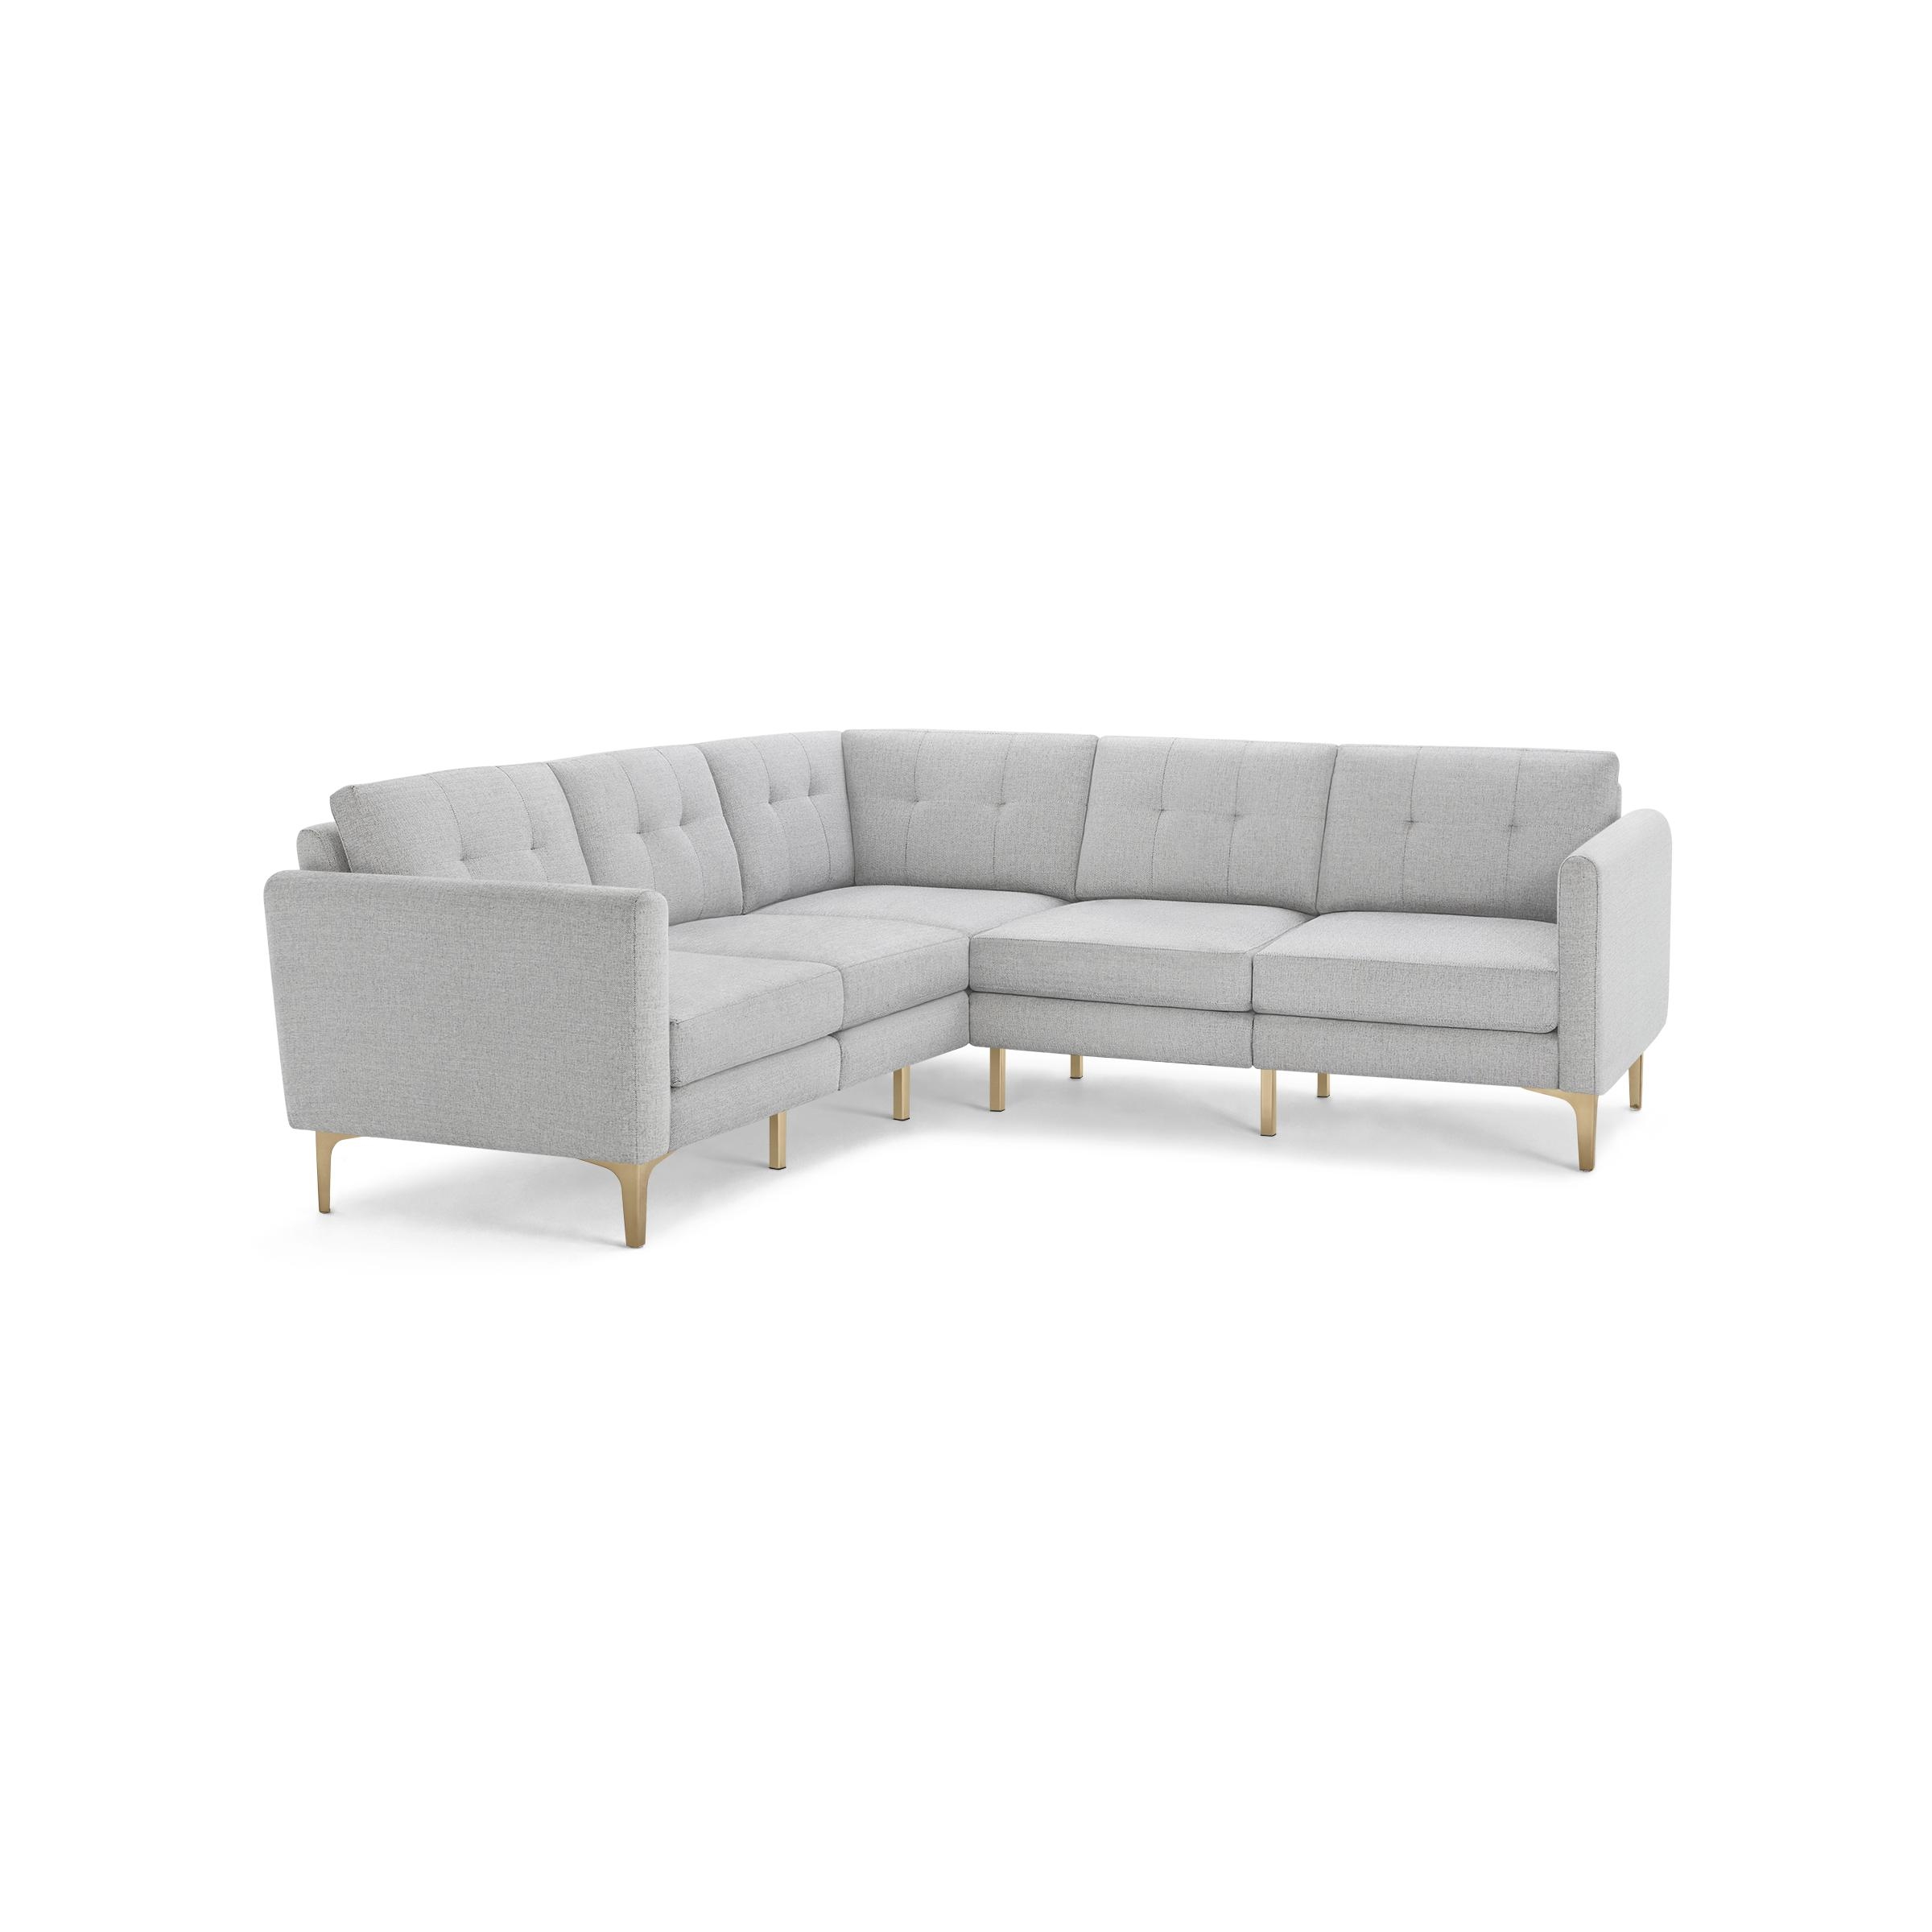 Nomad 5-Seat Corner Sectional in Crushed Gravel - Image 0